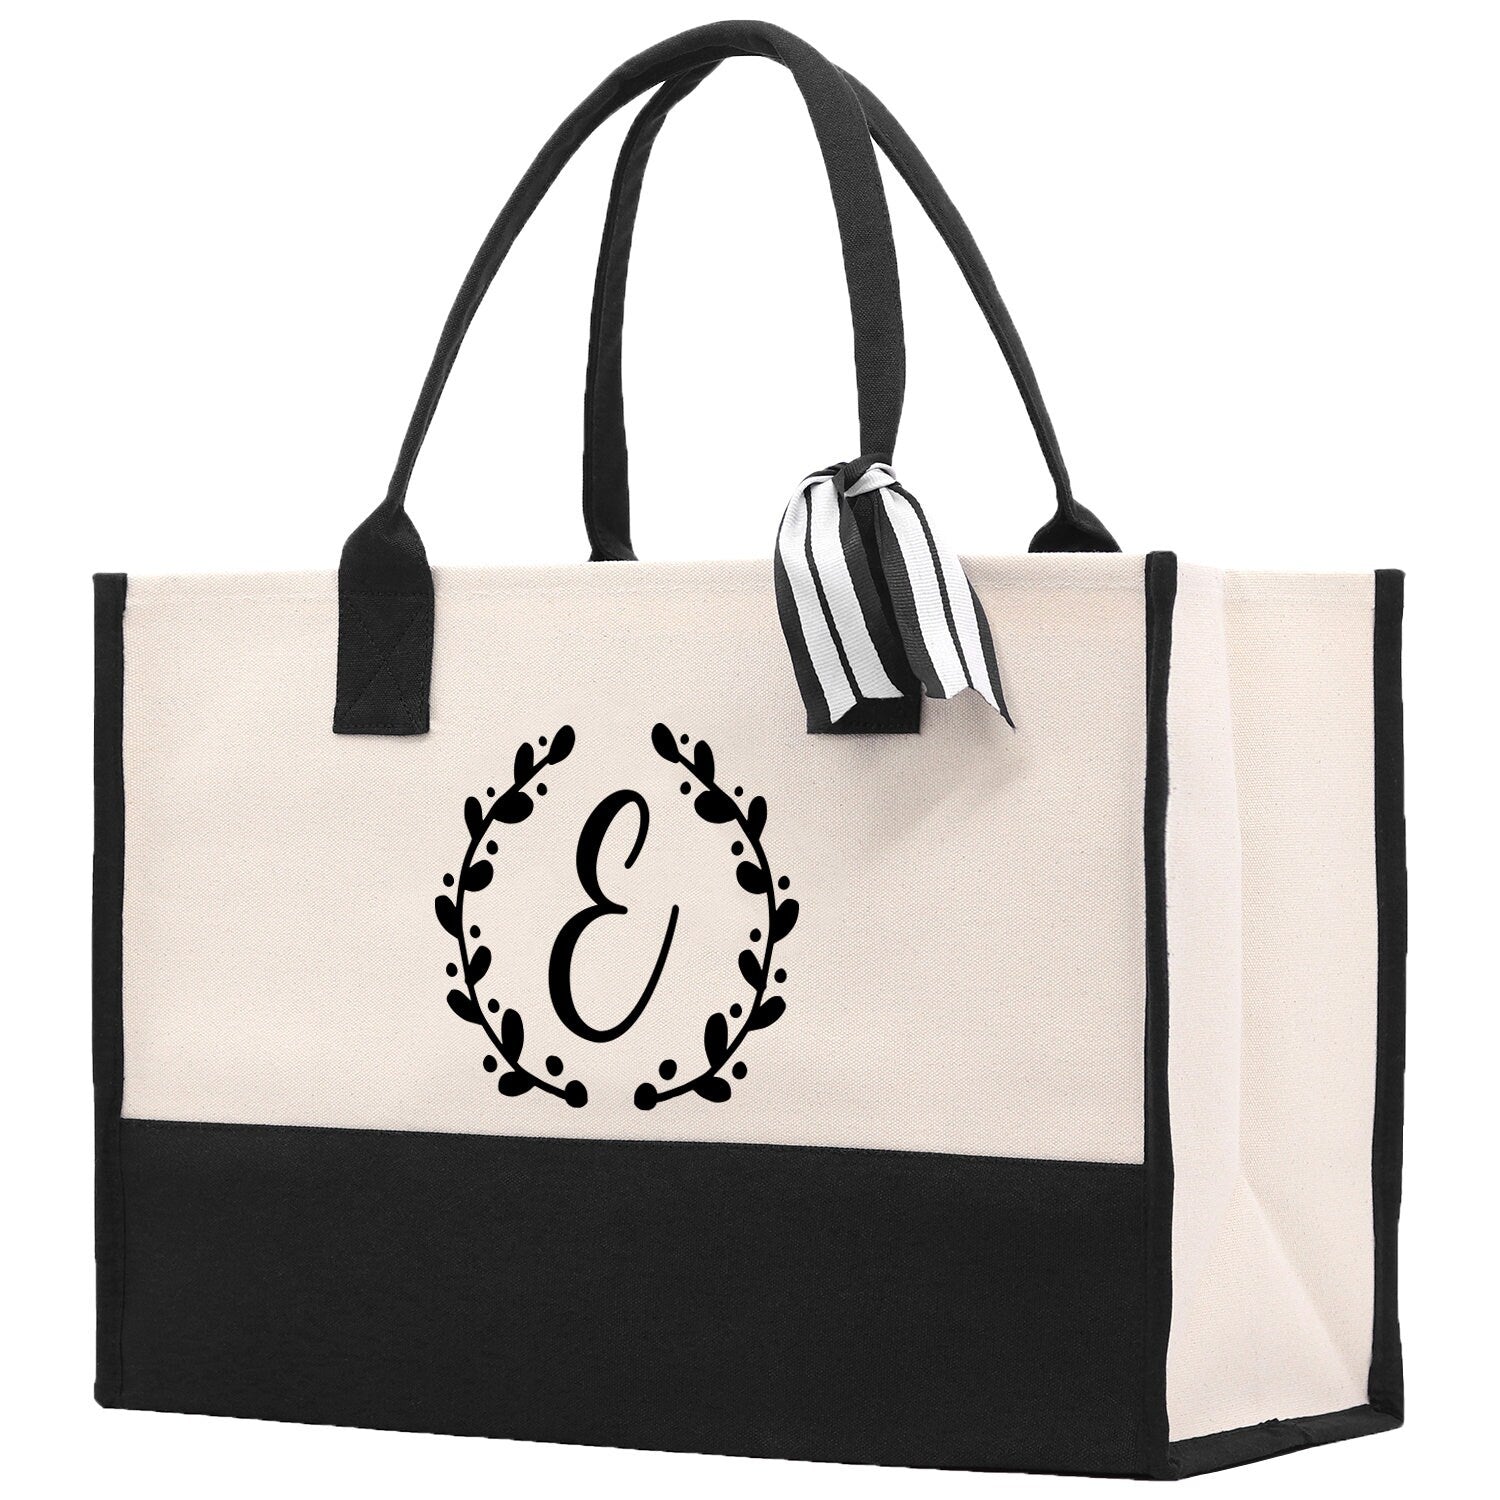 Monogram Beach Canvas Tote Bag Initial Tote Bag Letter Tote Bag Birthday Gift Personalized Tote Bag Personalized Beach Bag Monogrammed Bag